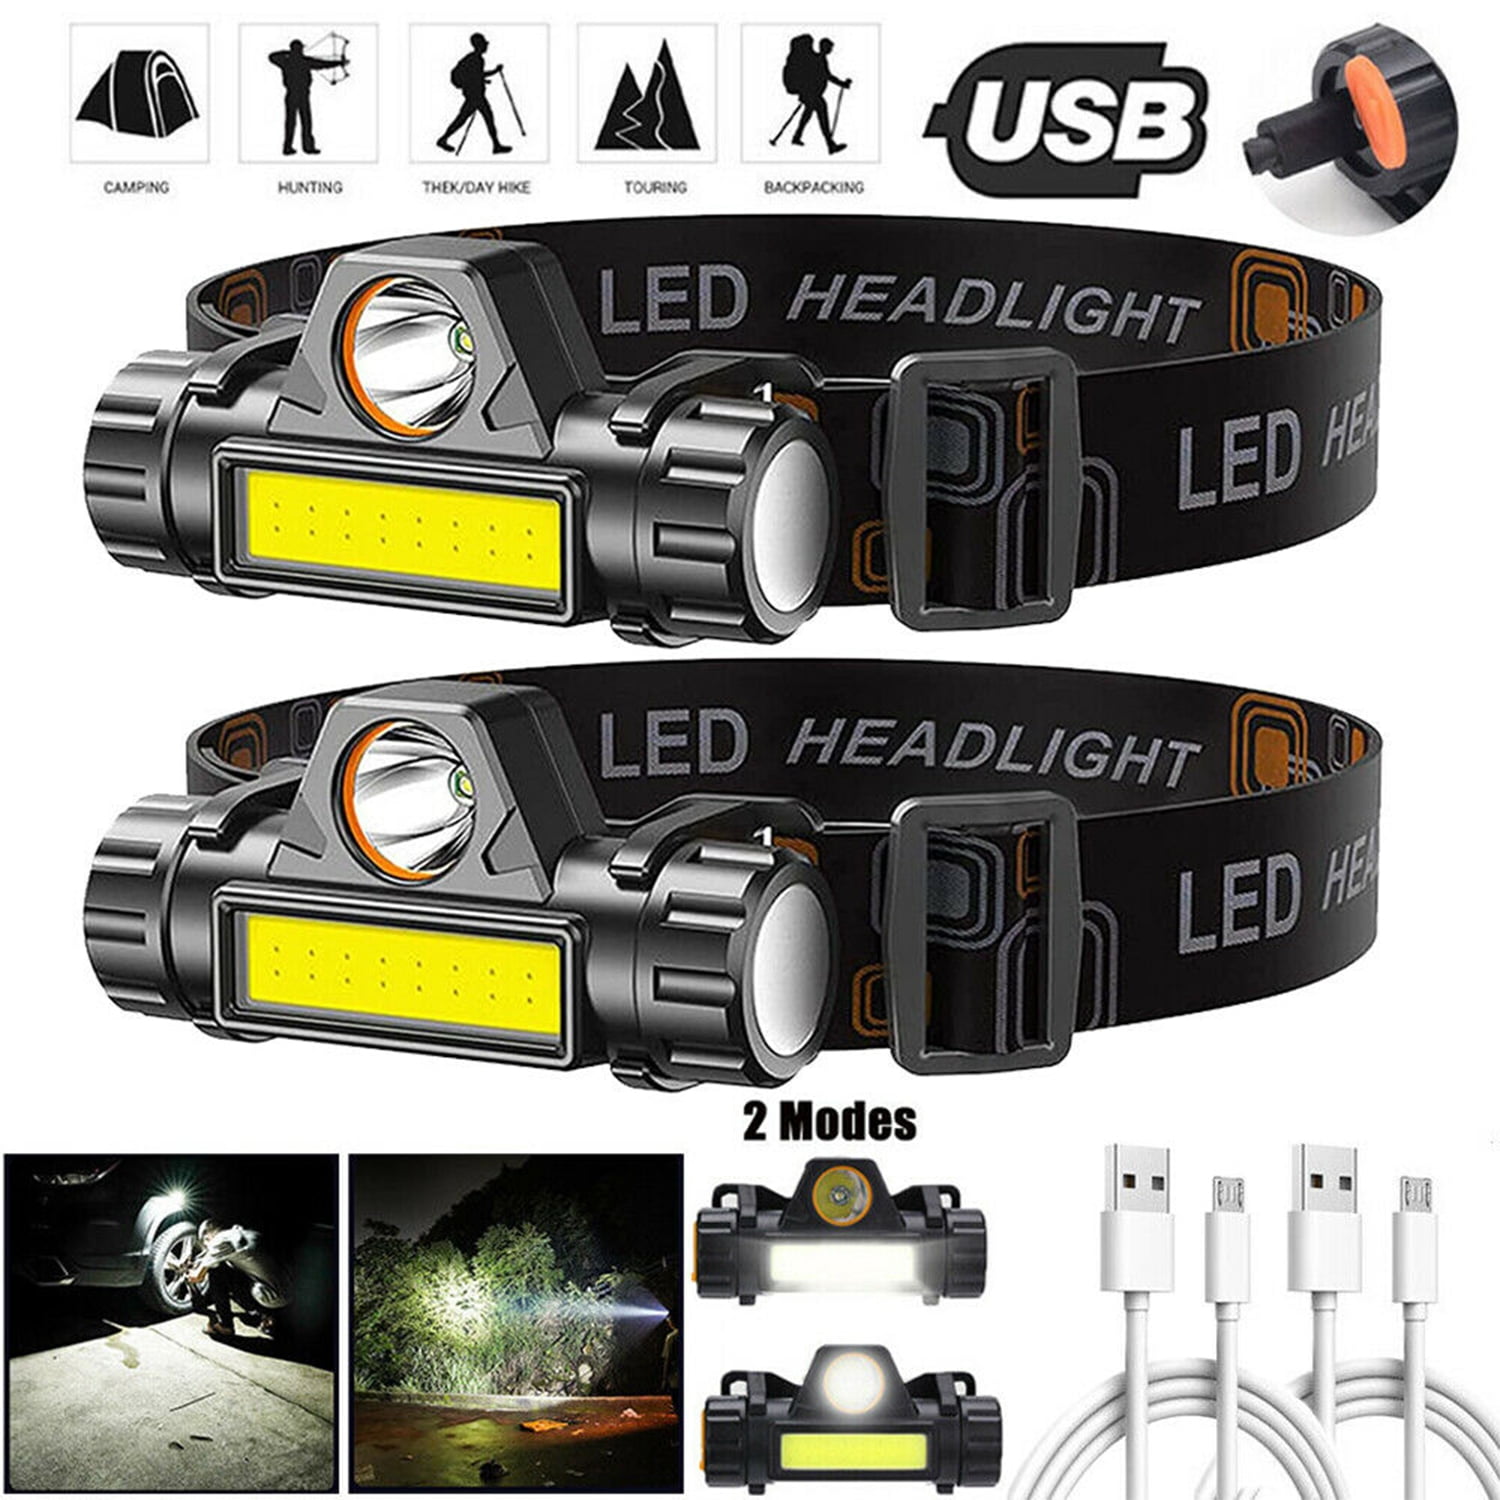 Xhy Pack Headlamp Rechargeable, Super Bright High Lumen Headlamps, LED  Head Lamp with Modes Adjustable Size, Lightweight Waterproof headlight  for Running, Camping, Fishing, Outdoor